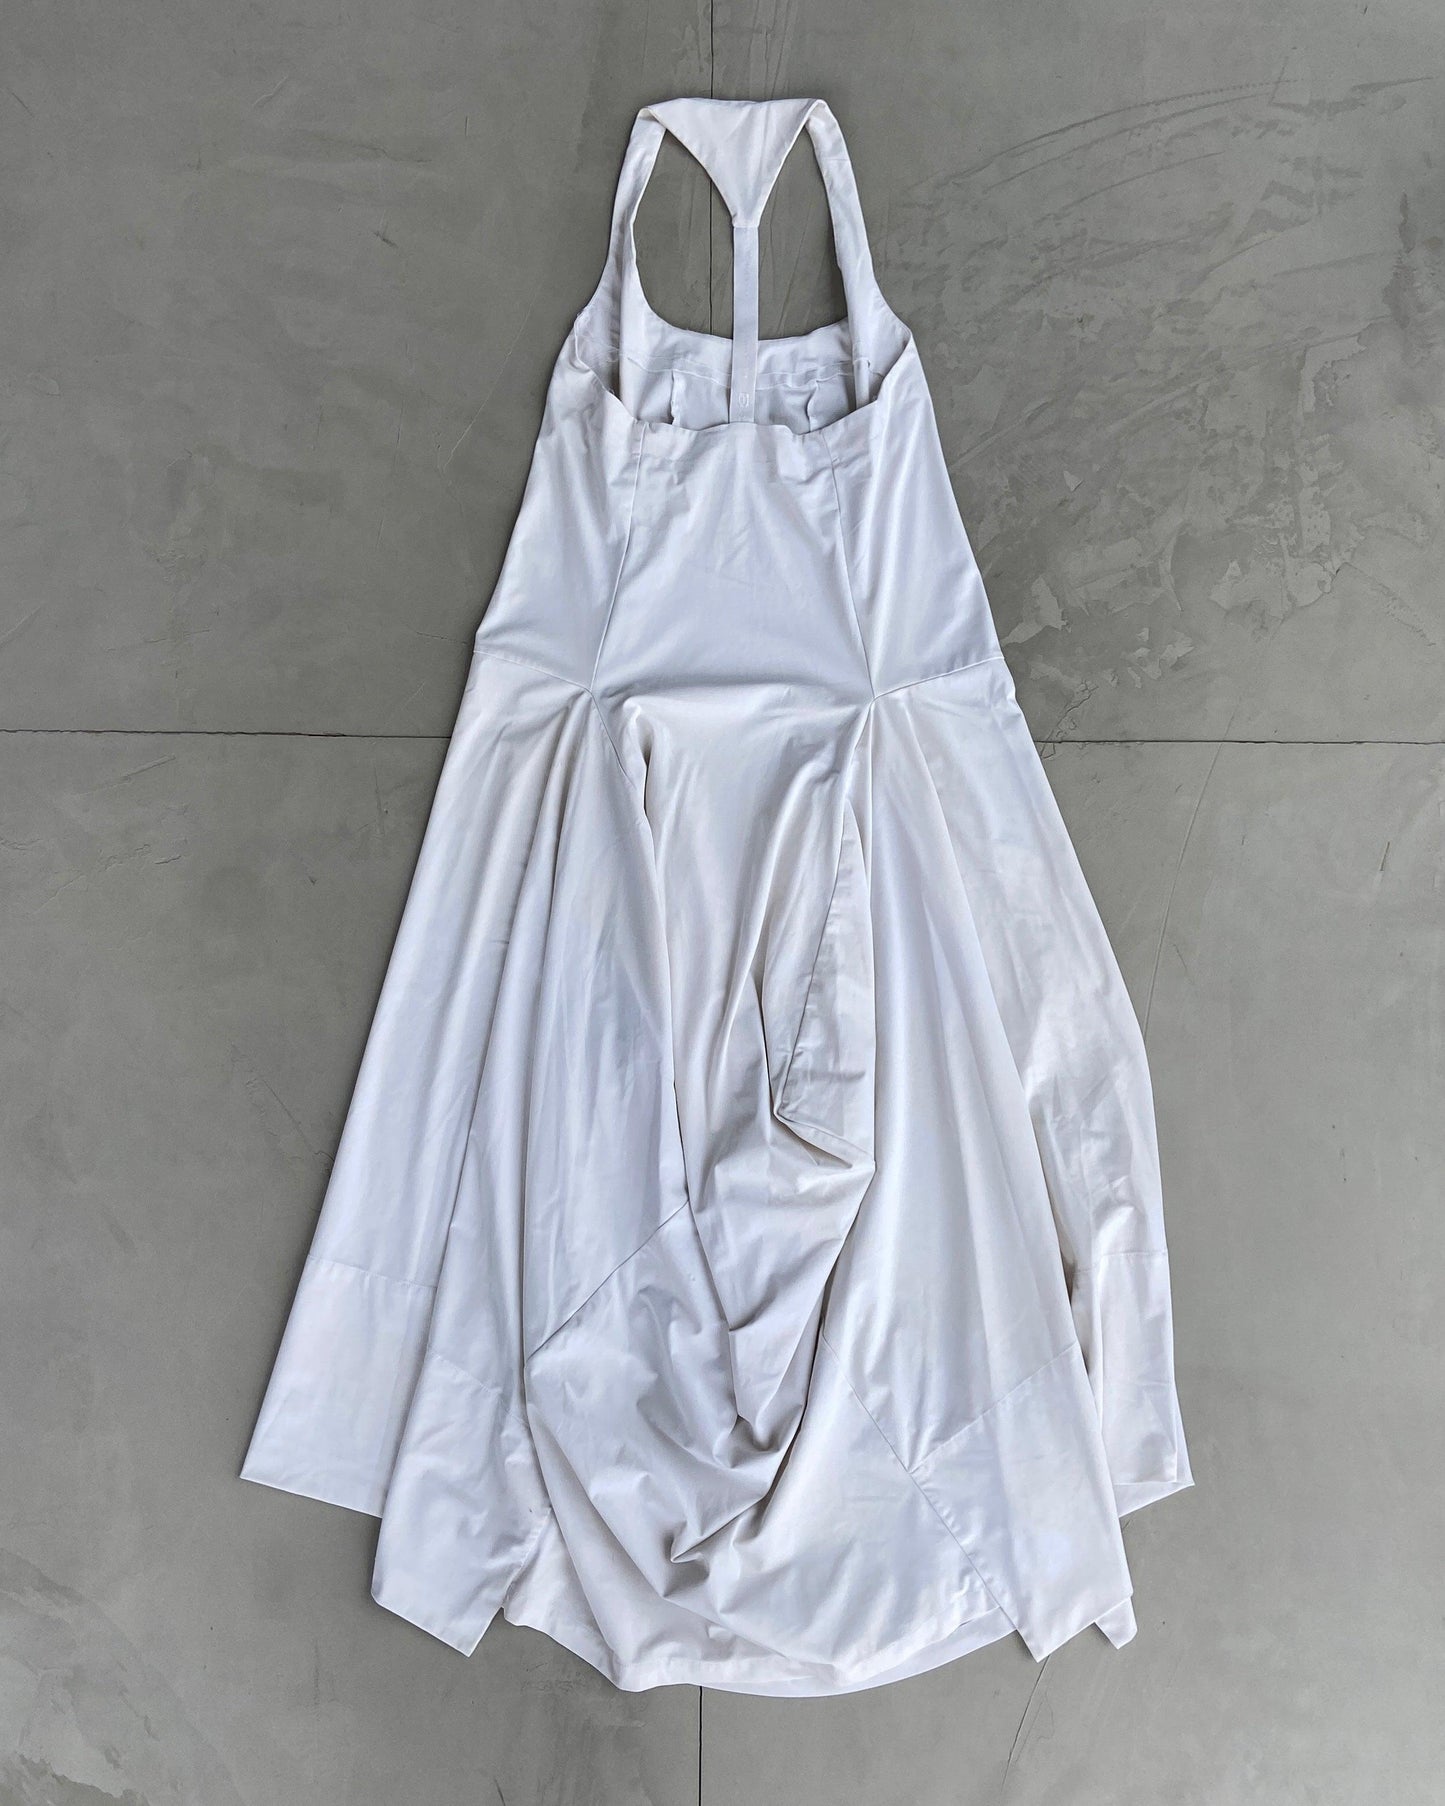 MARITHE FRANCOIS GIRBAUD MFG WHITE TRIANGLE DRESS - M - Known Source